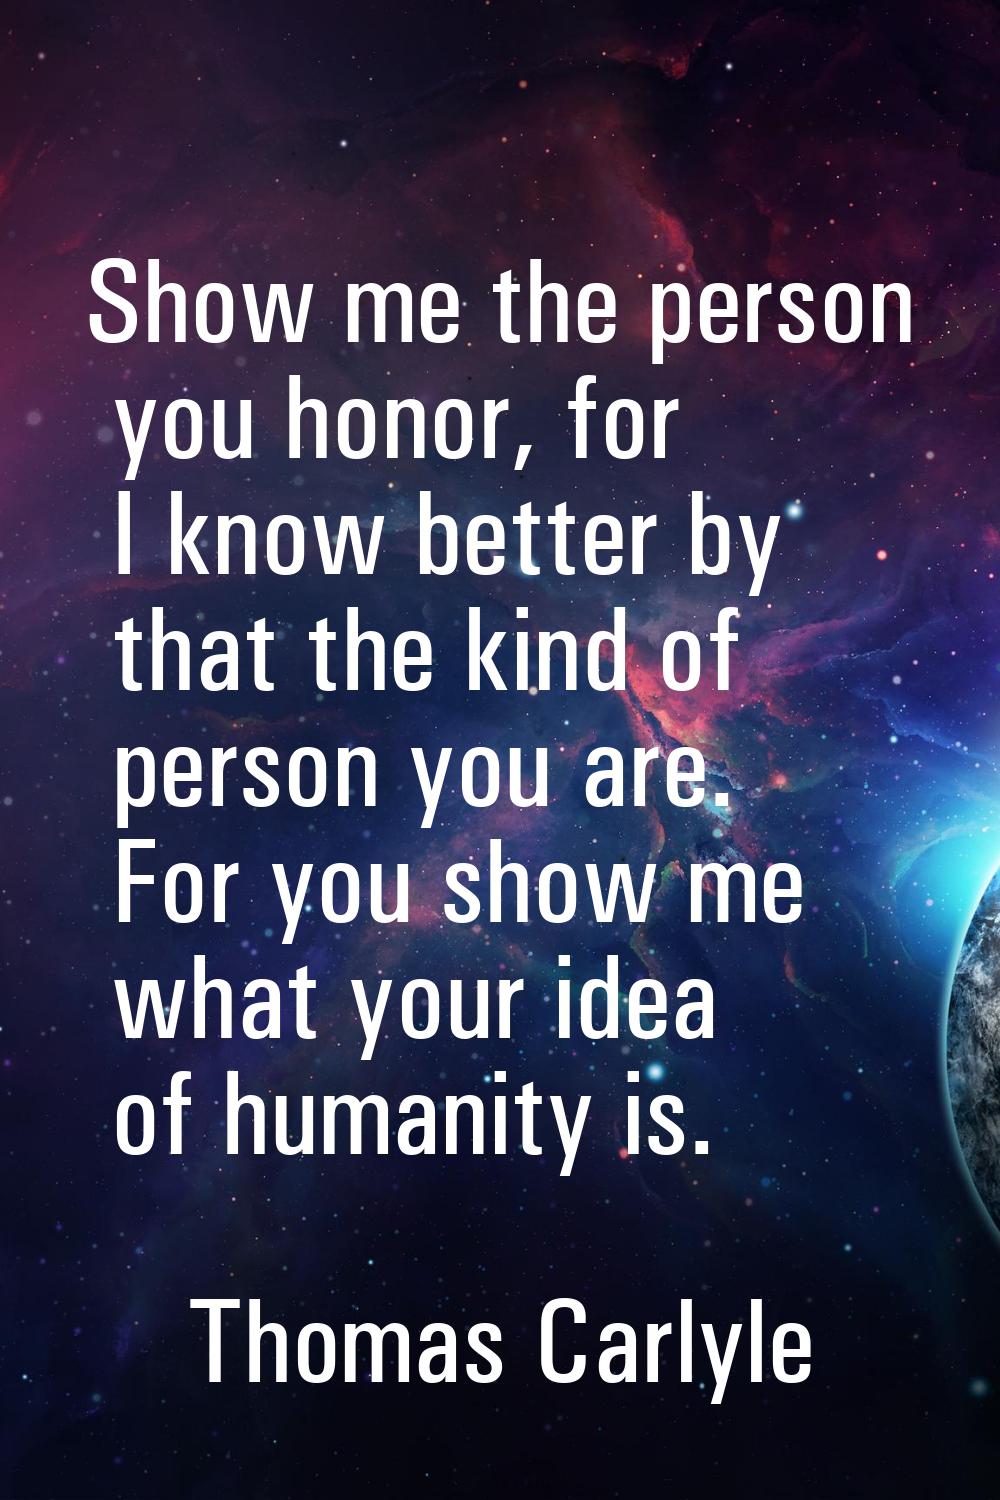 Show me the person you honor, for I know better by that the kind of person you are. For you show me